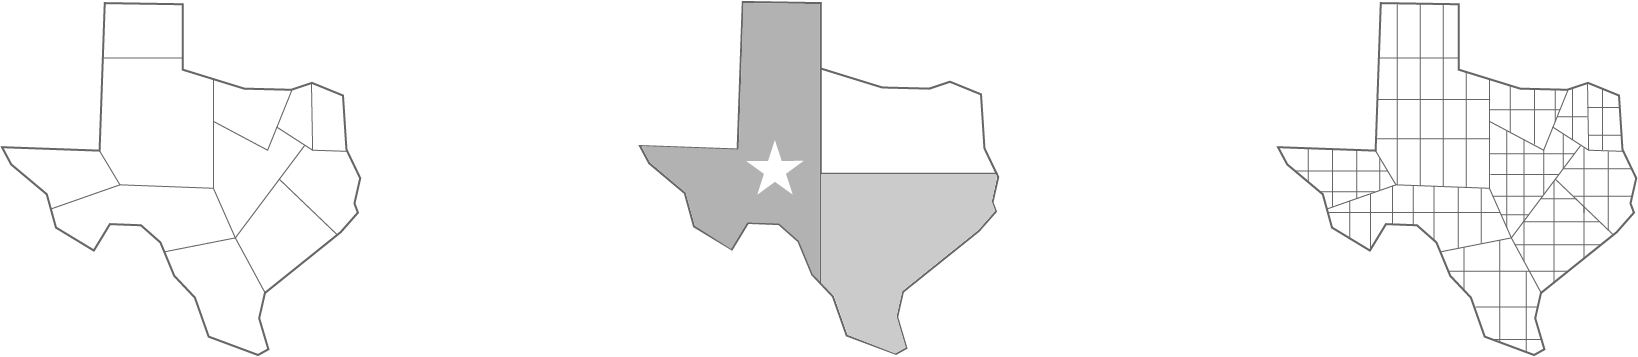 Representation of Tx carved into districts